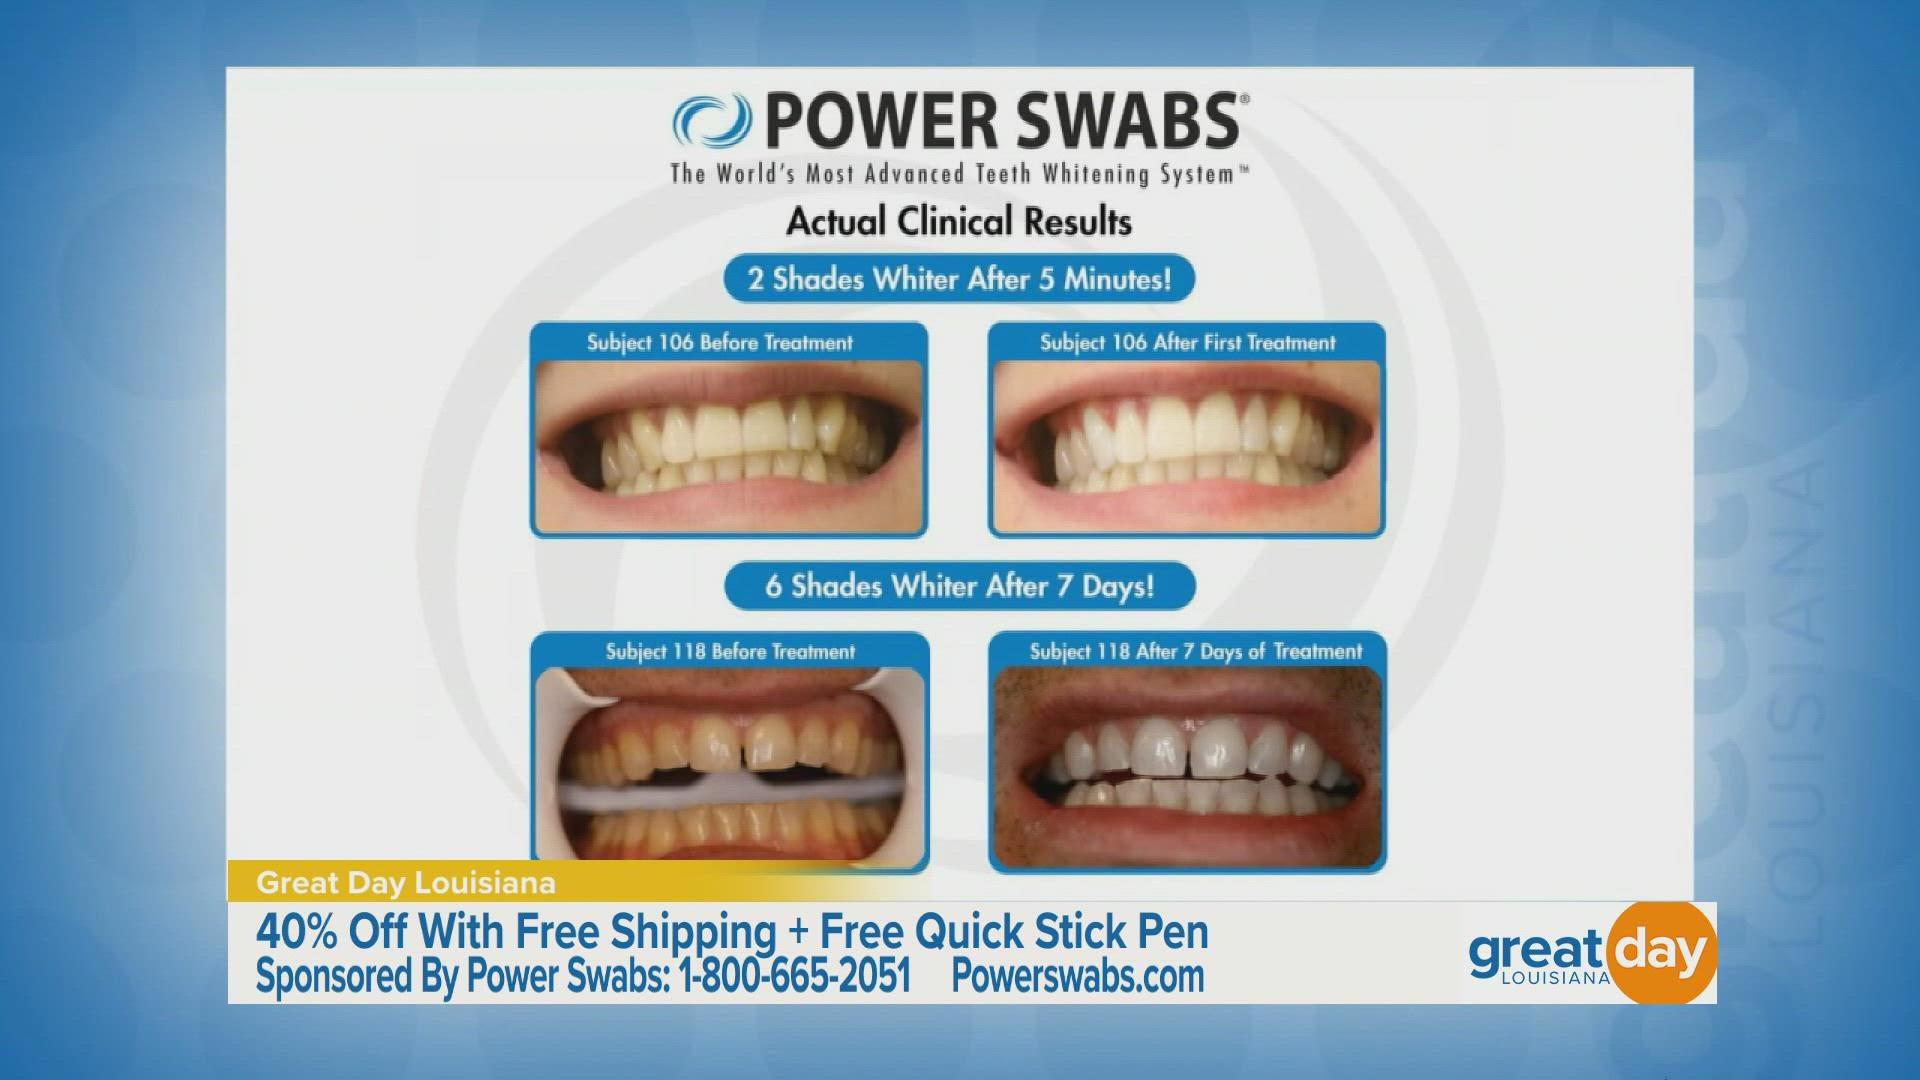 Power Swabs say they can lift those coffee stains from your teeth in just 5 minutes.